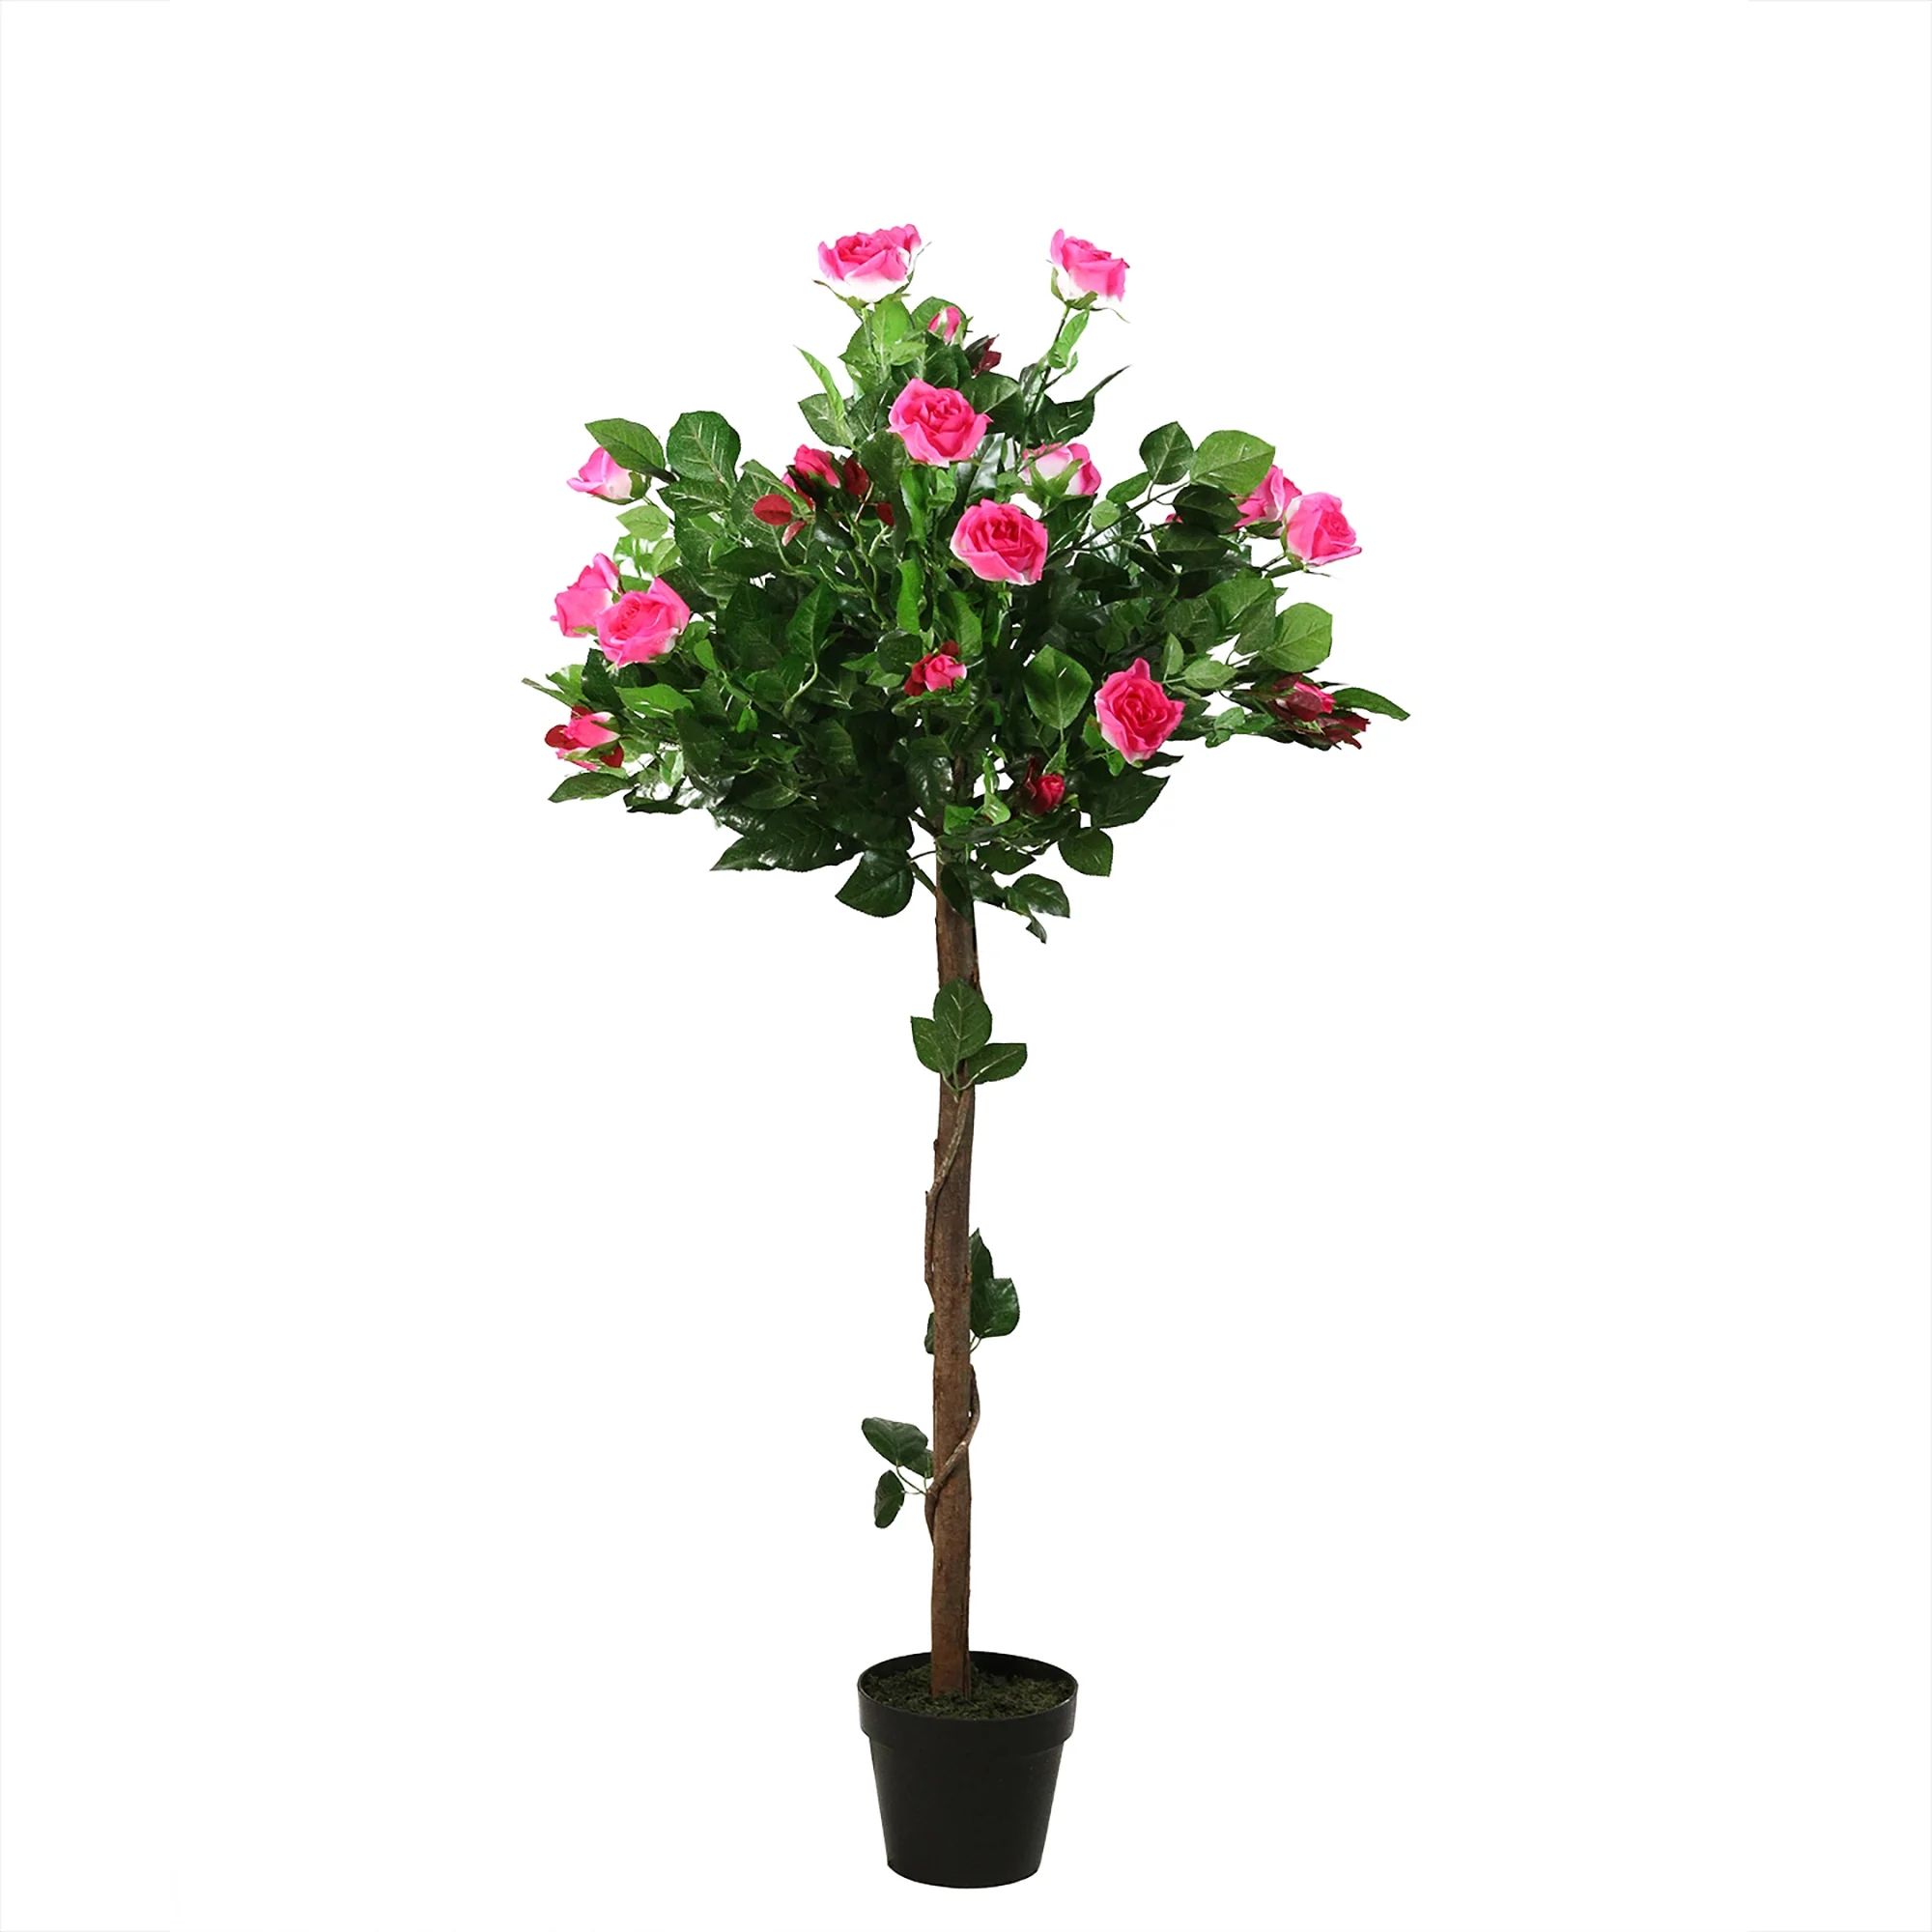 49.5" Potted White and Pink Artificial Rose Garden Tree | Walmart (US)